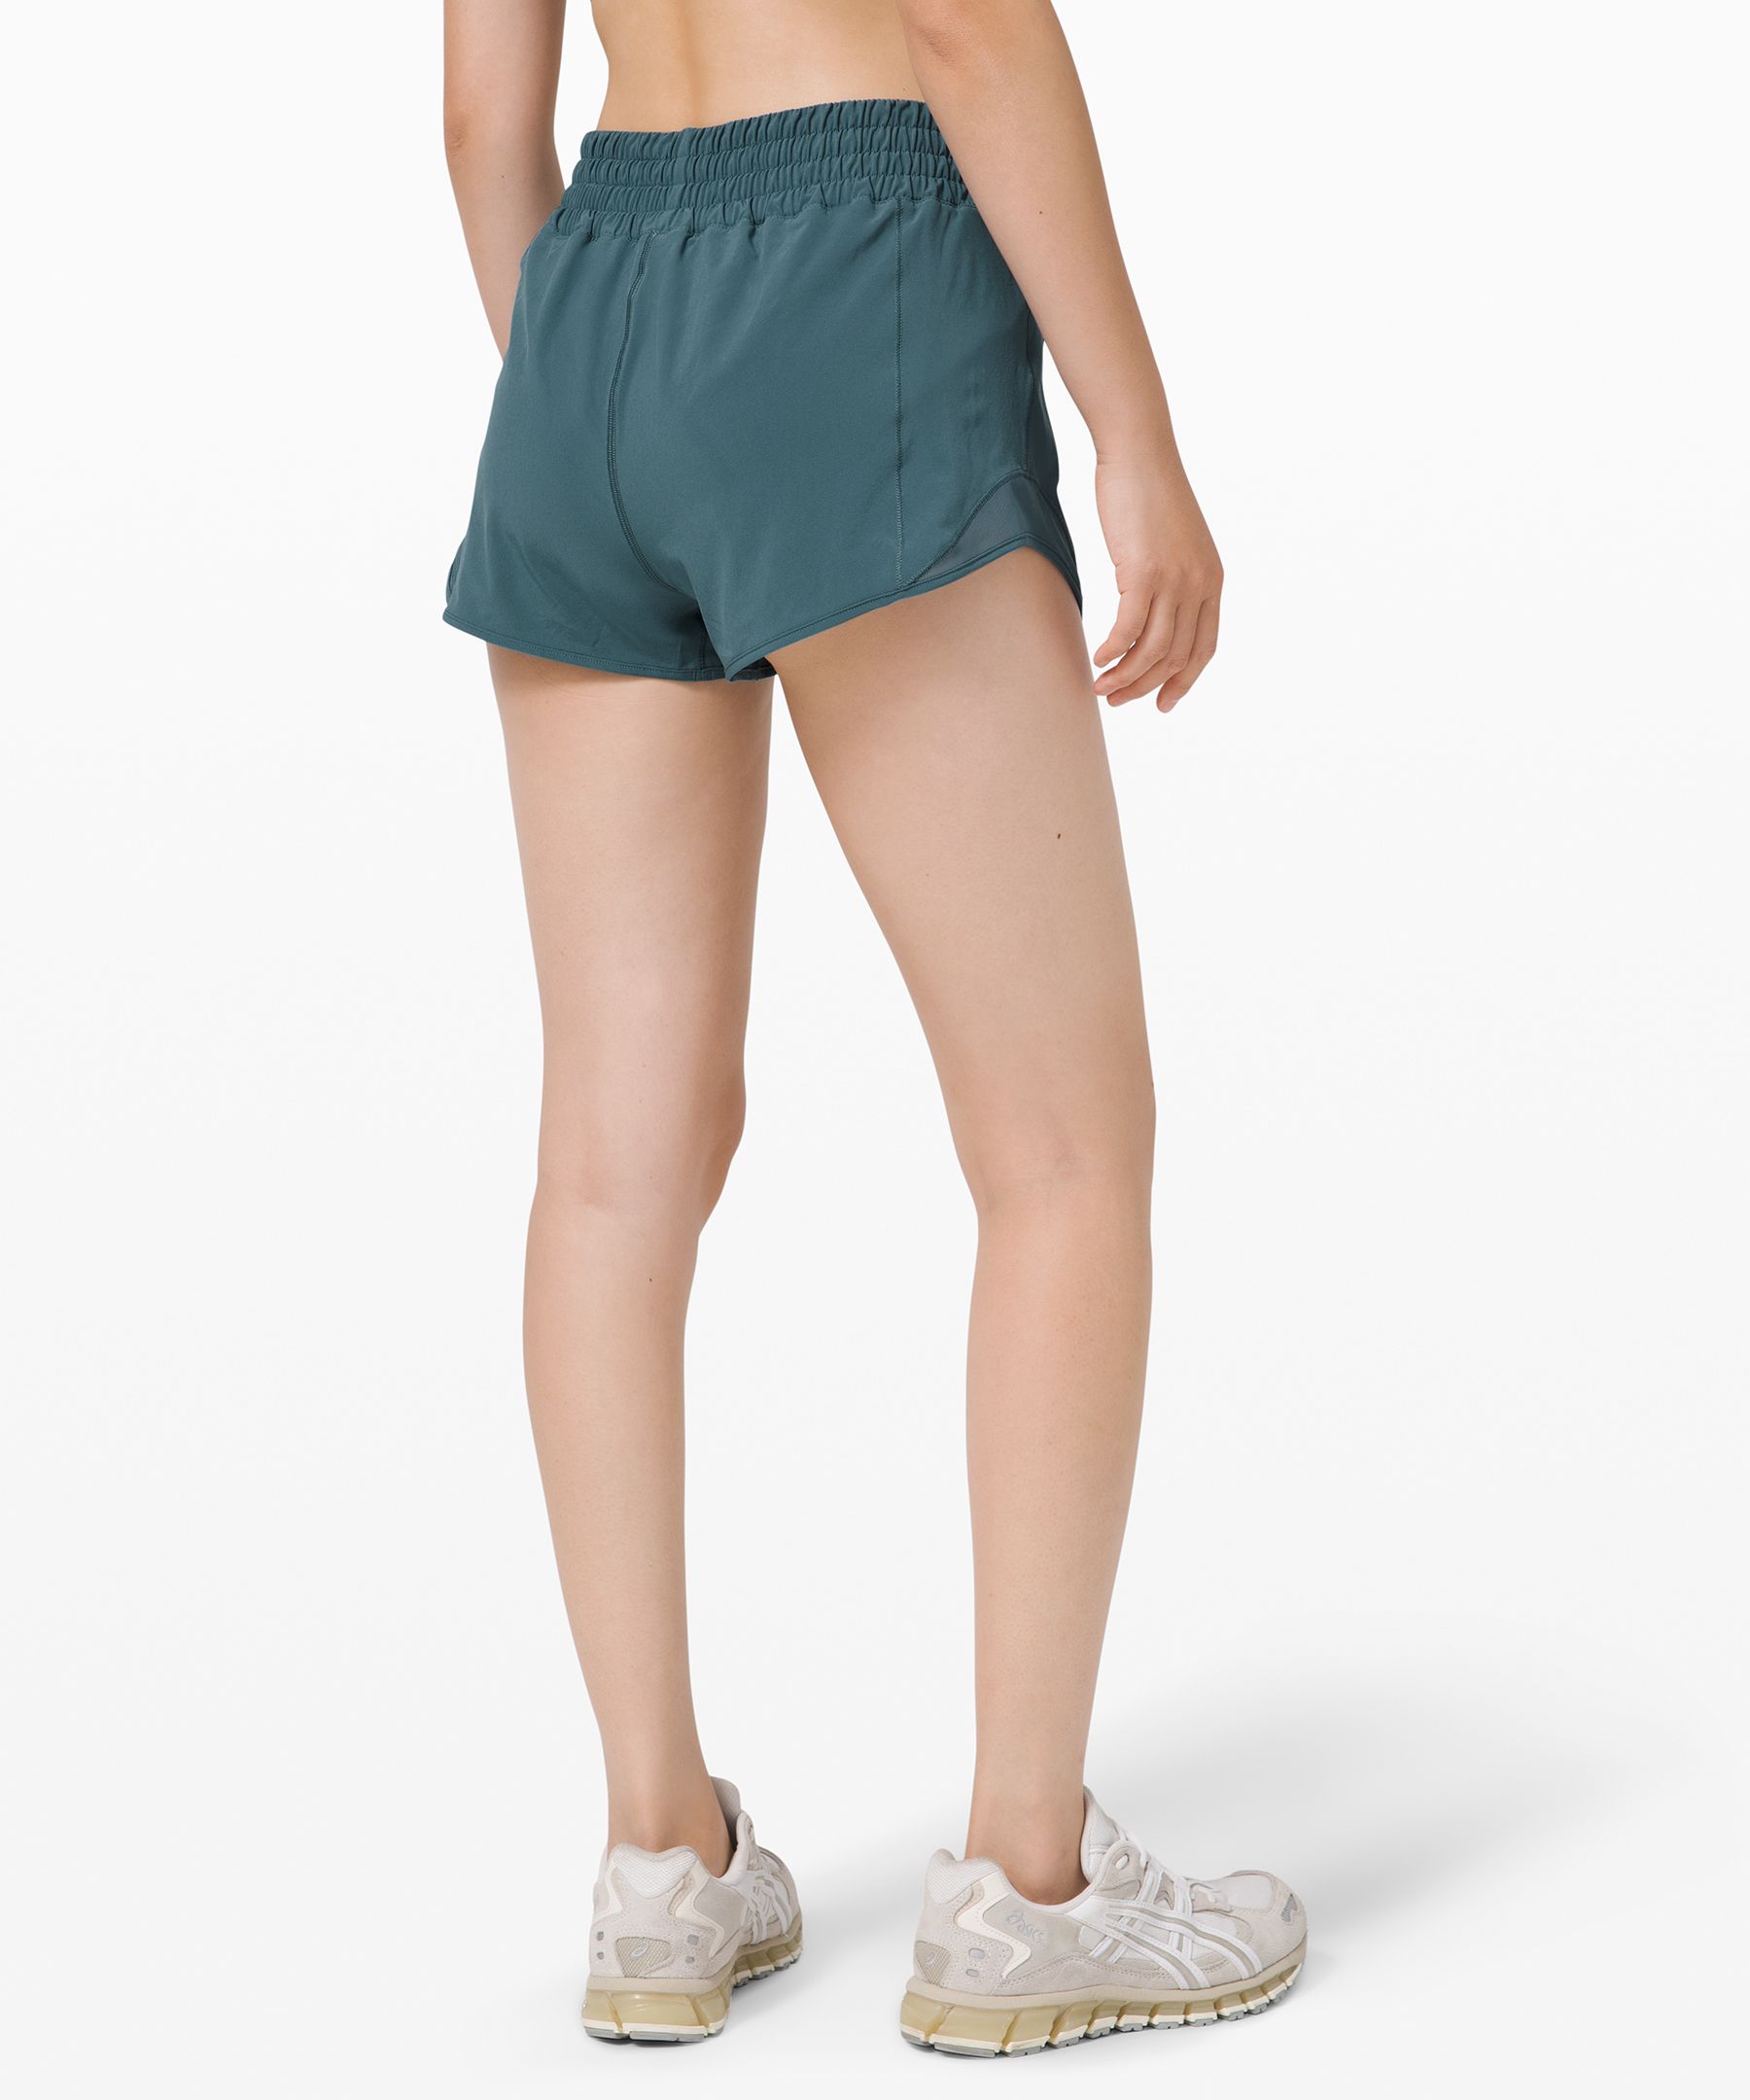 lululemon athletica Hotty Hot Low-rise Lined Shorts - 2.5 - Color Blue/pastel  - Size 12